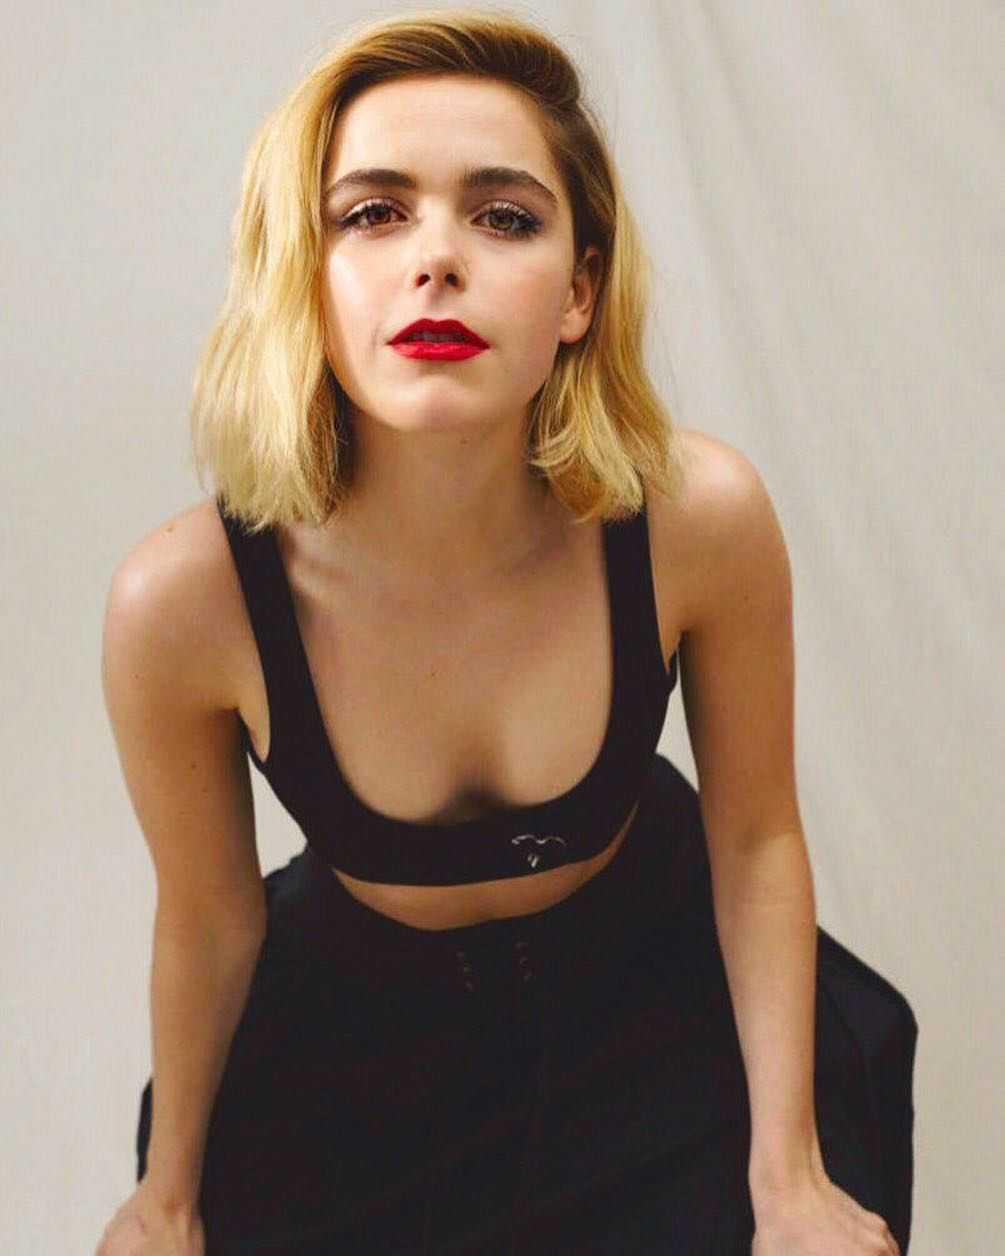 Cum drunk Kiernan Shipka waiting for your load all over her